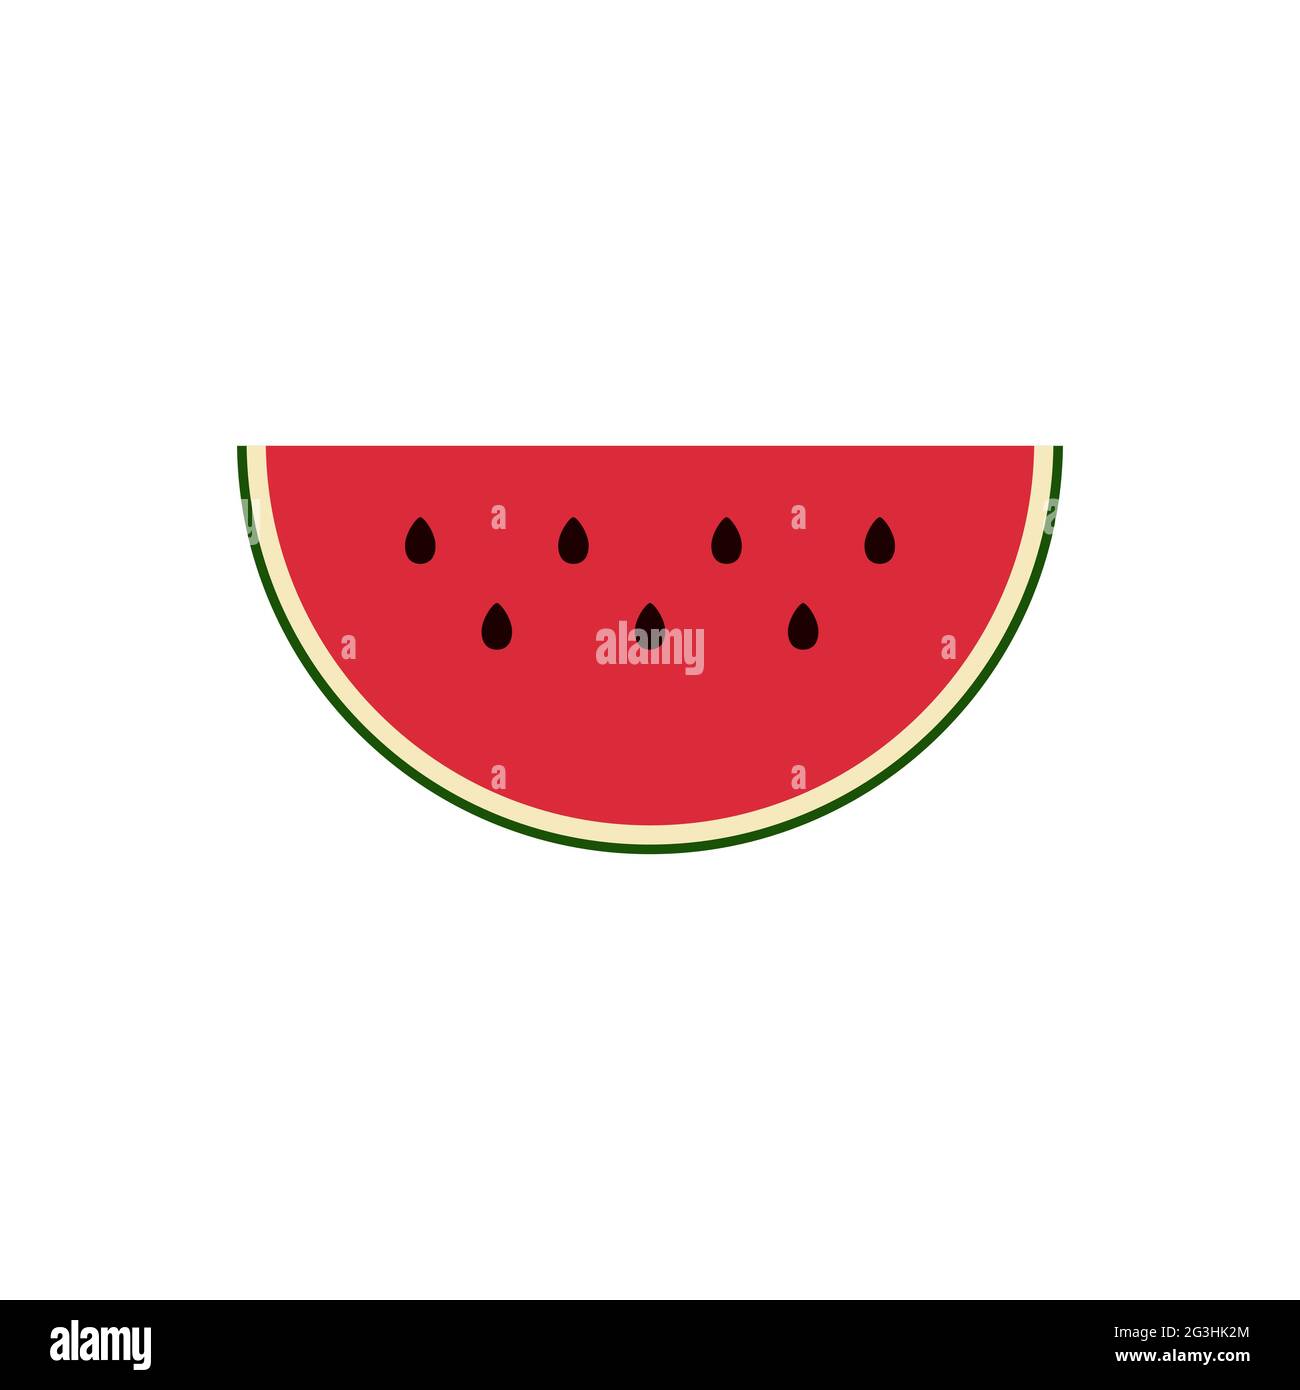 Watermelon slice Isolated on white background. Flat icon of fresh fruit. Colorful bright summer food. Sweet treat image. Red pink semicircular melon w Stock Vector